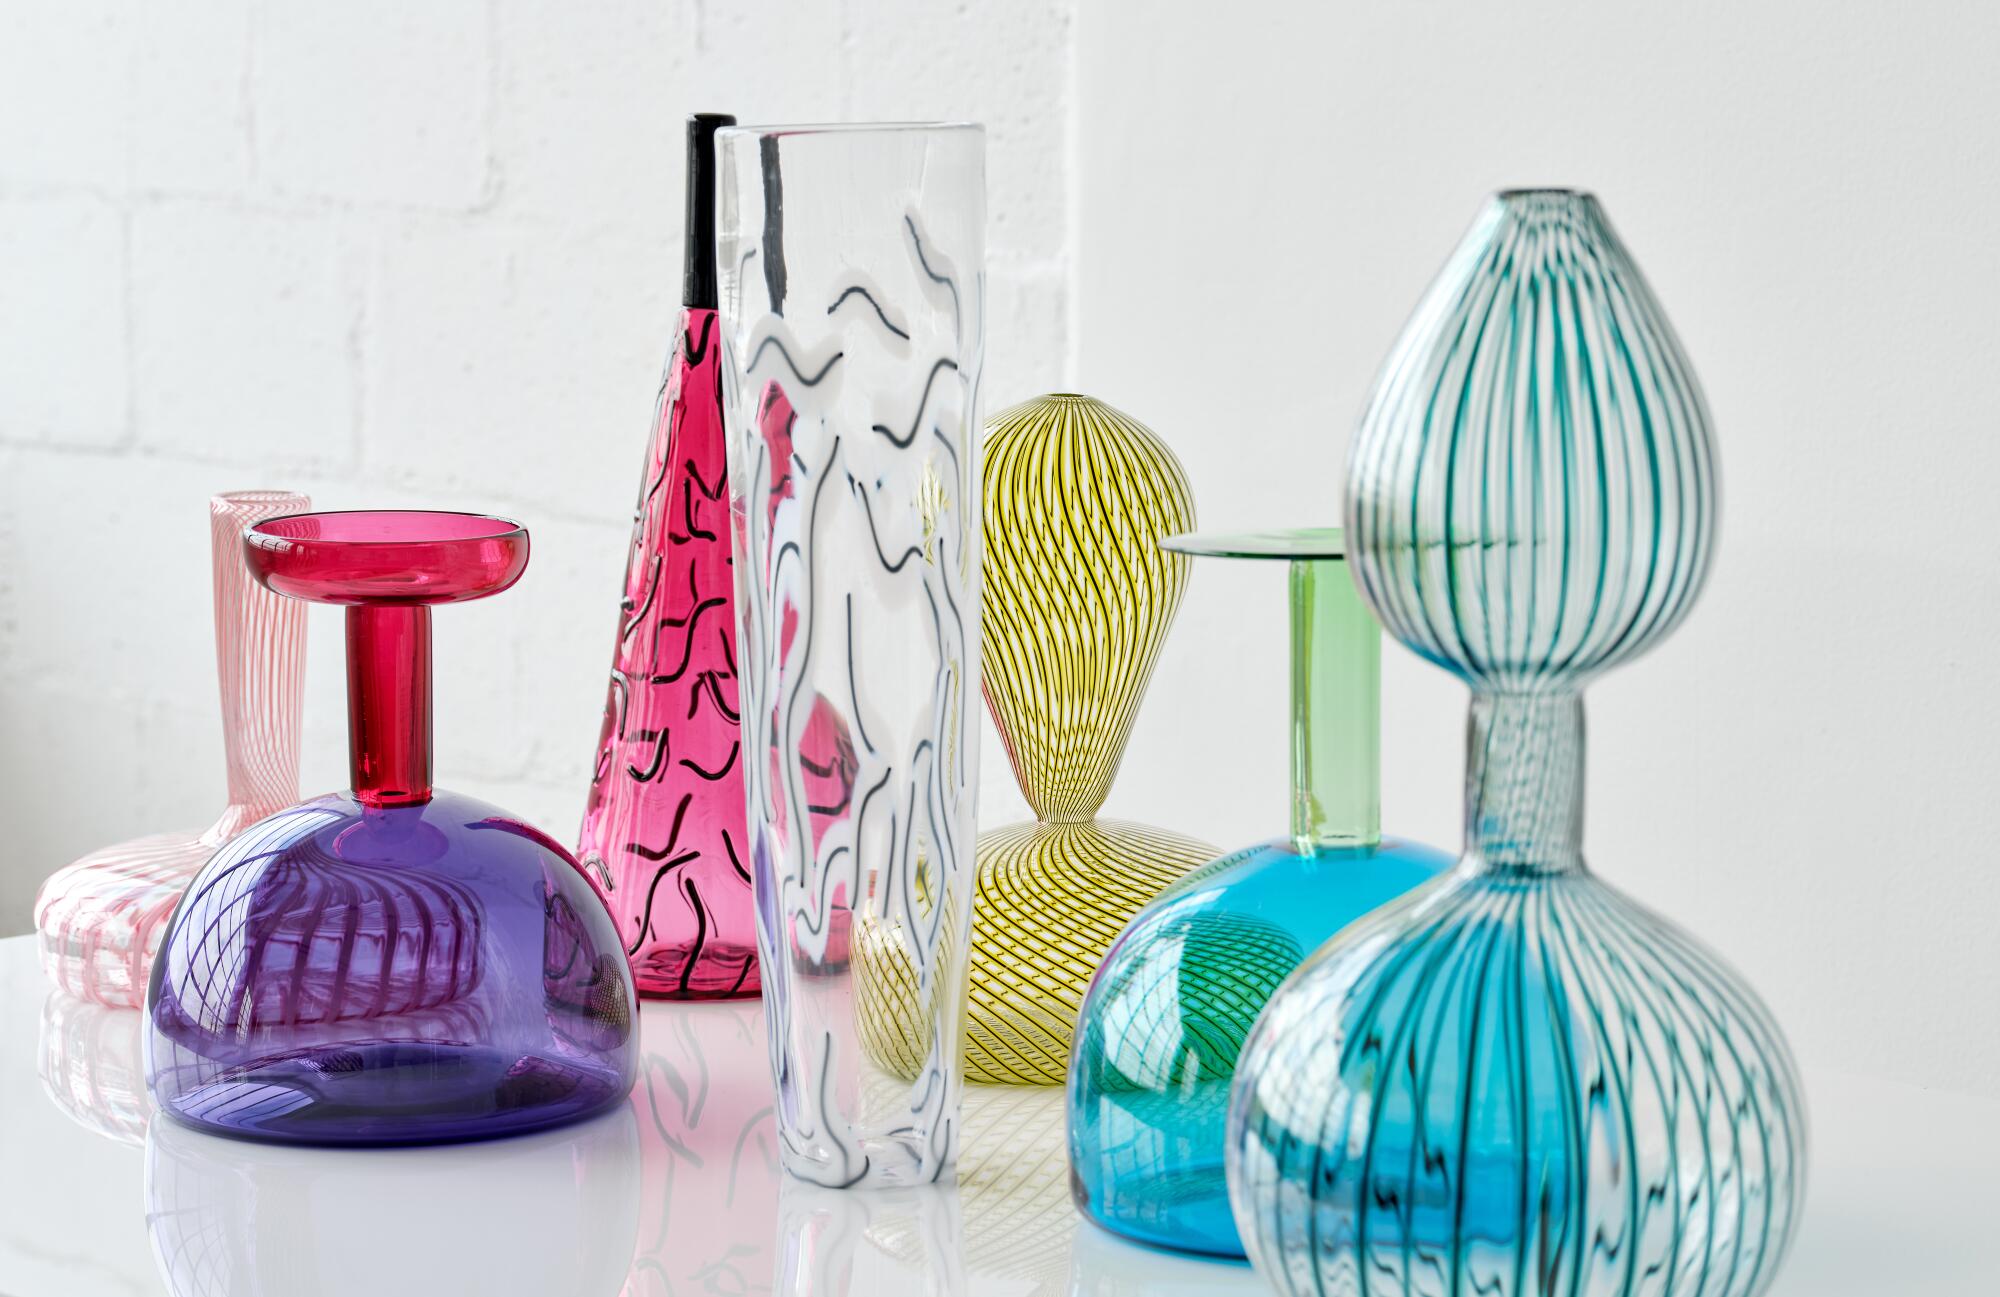 Colorful glass objects 